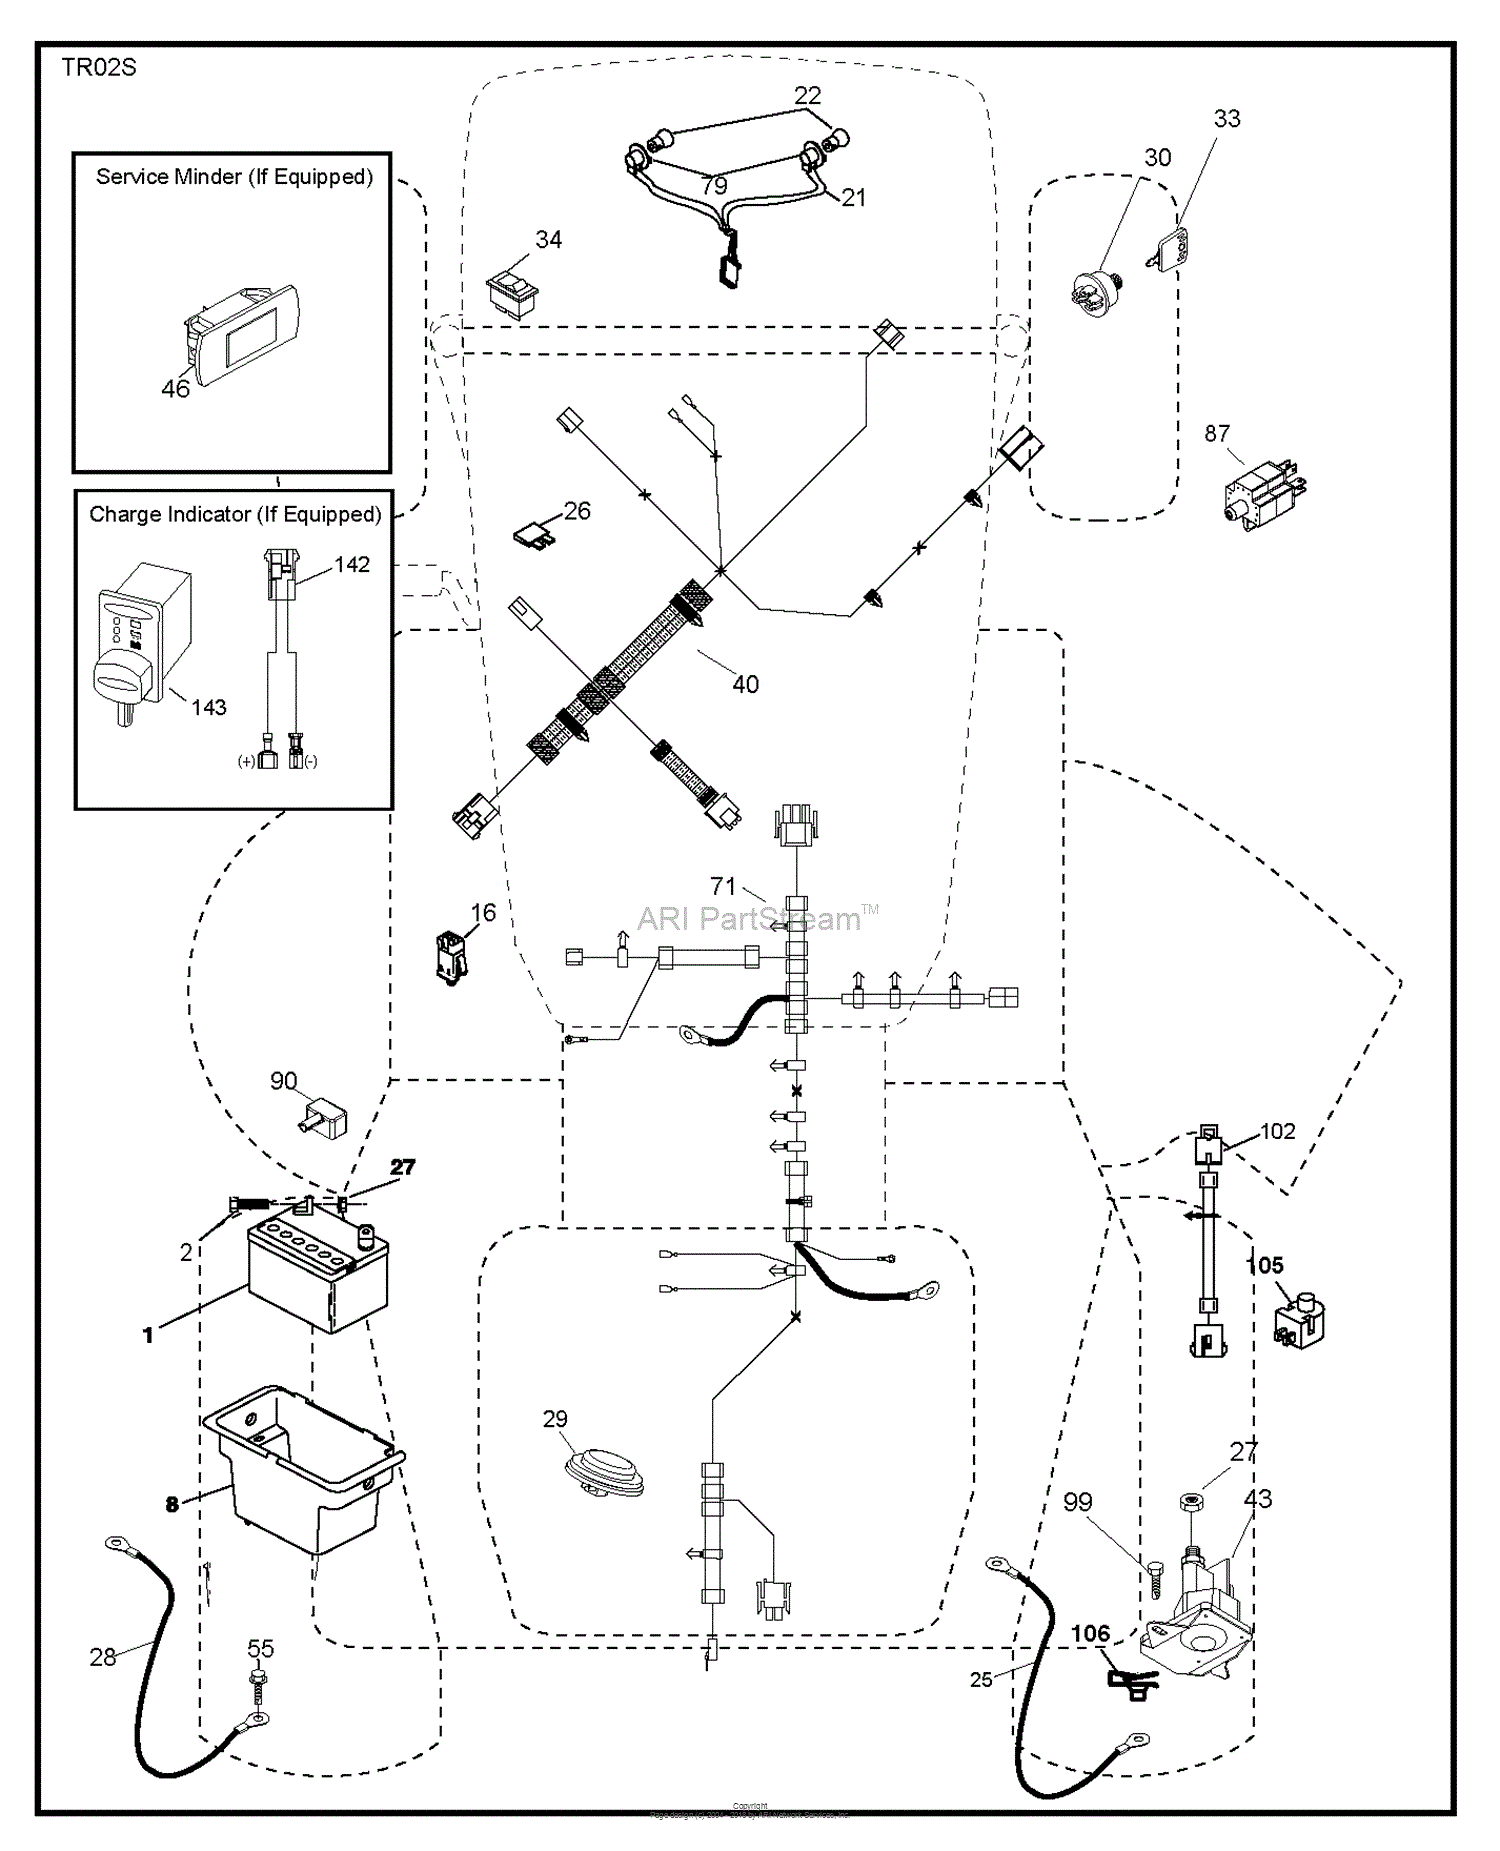 Wiring Diagram For Husqvarna Lawn Tractor from az417944.vo.msecnd.net